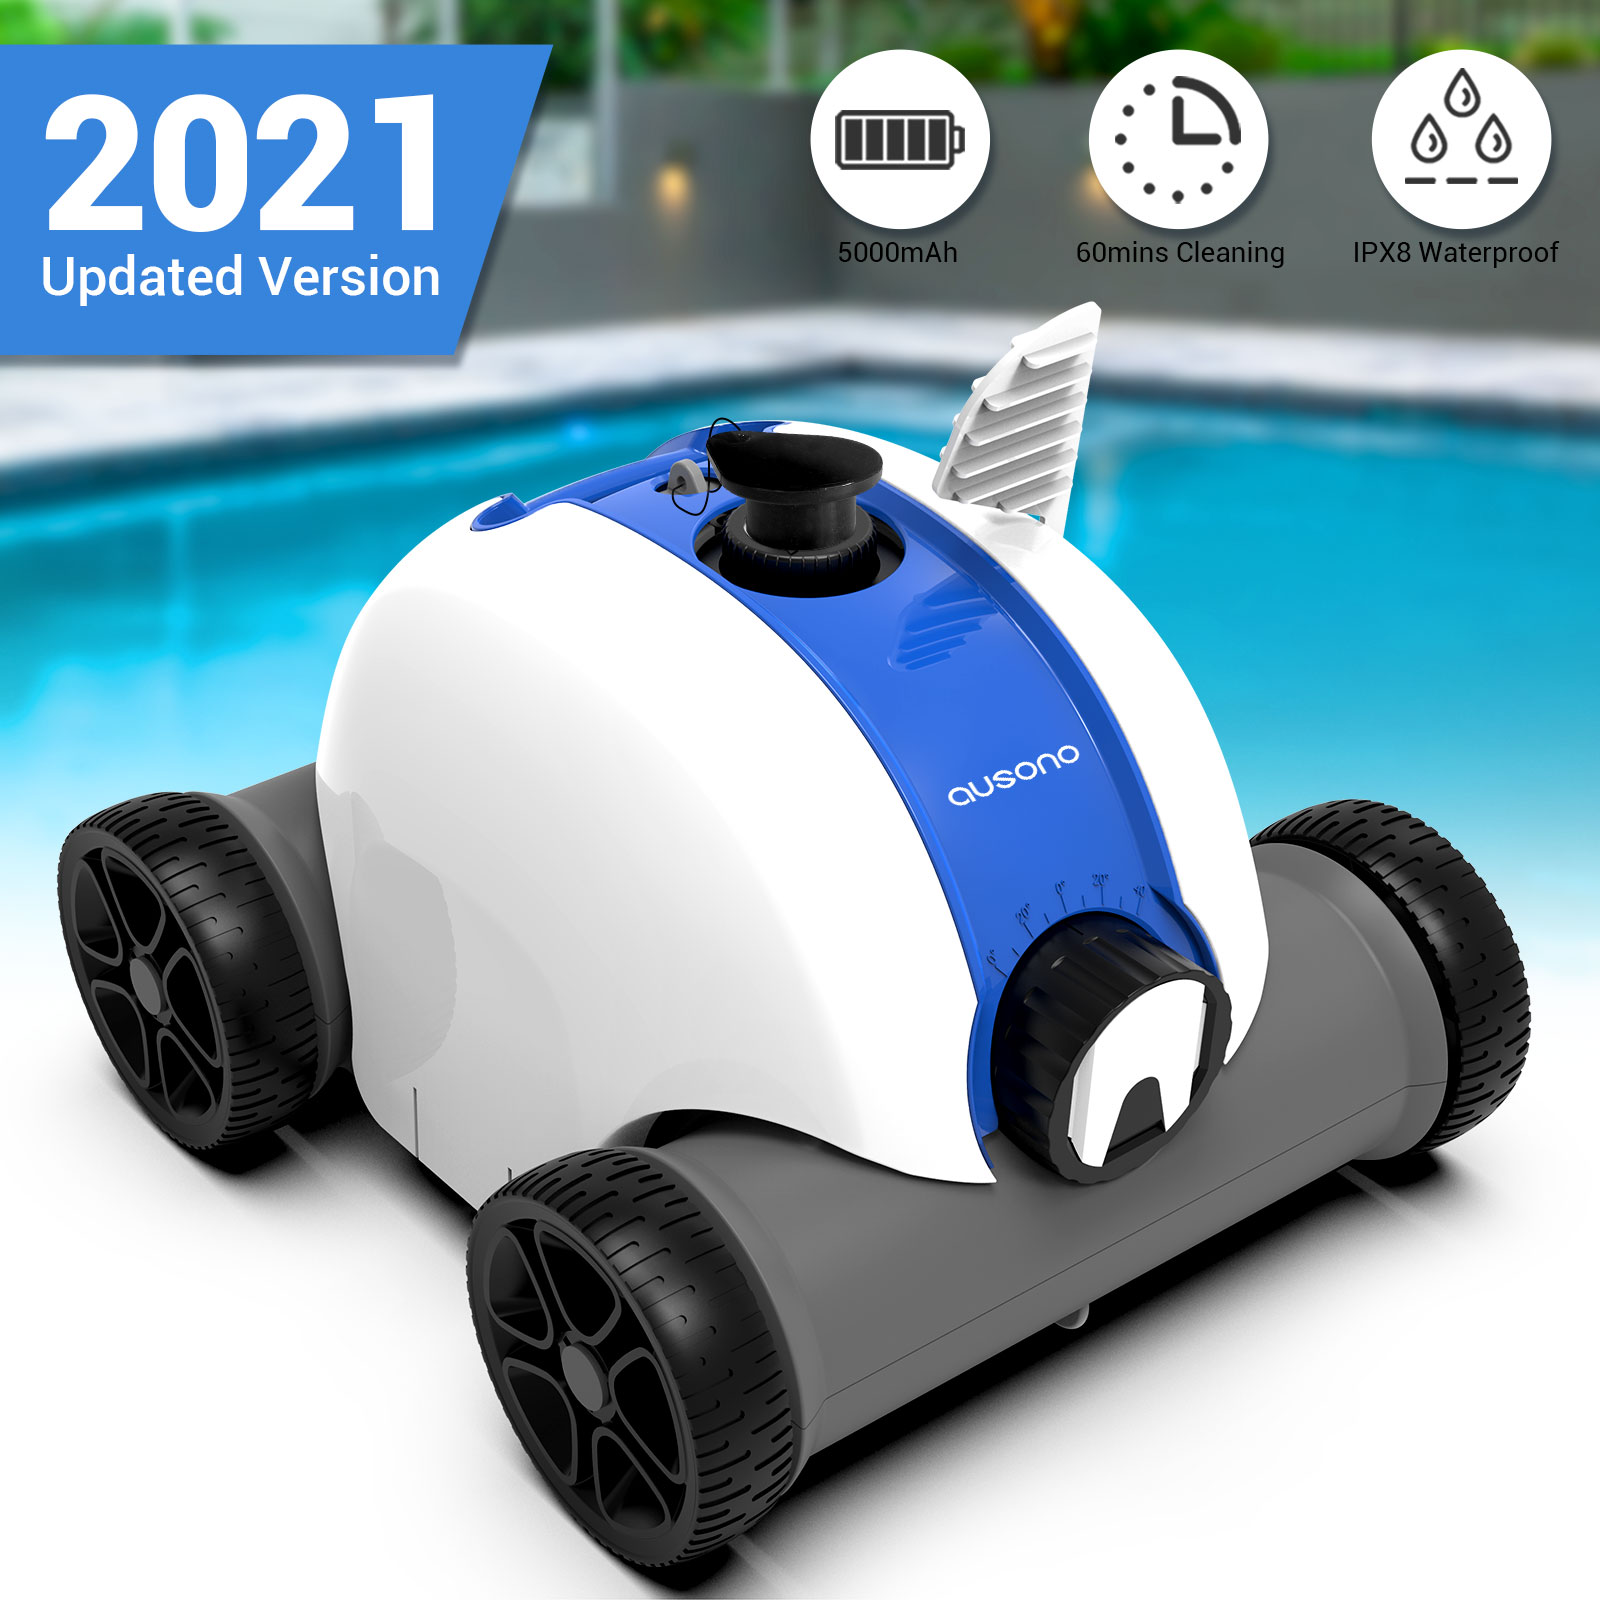 AUSONO Cordless Pool Cleaner for in-Ground and Above Ground Swimming Pool $269.99